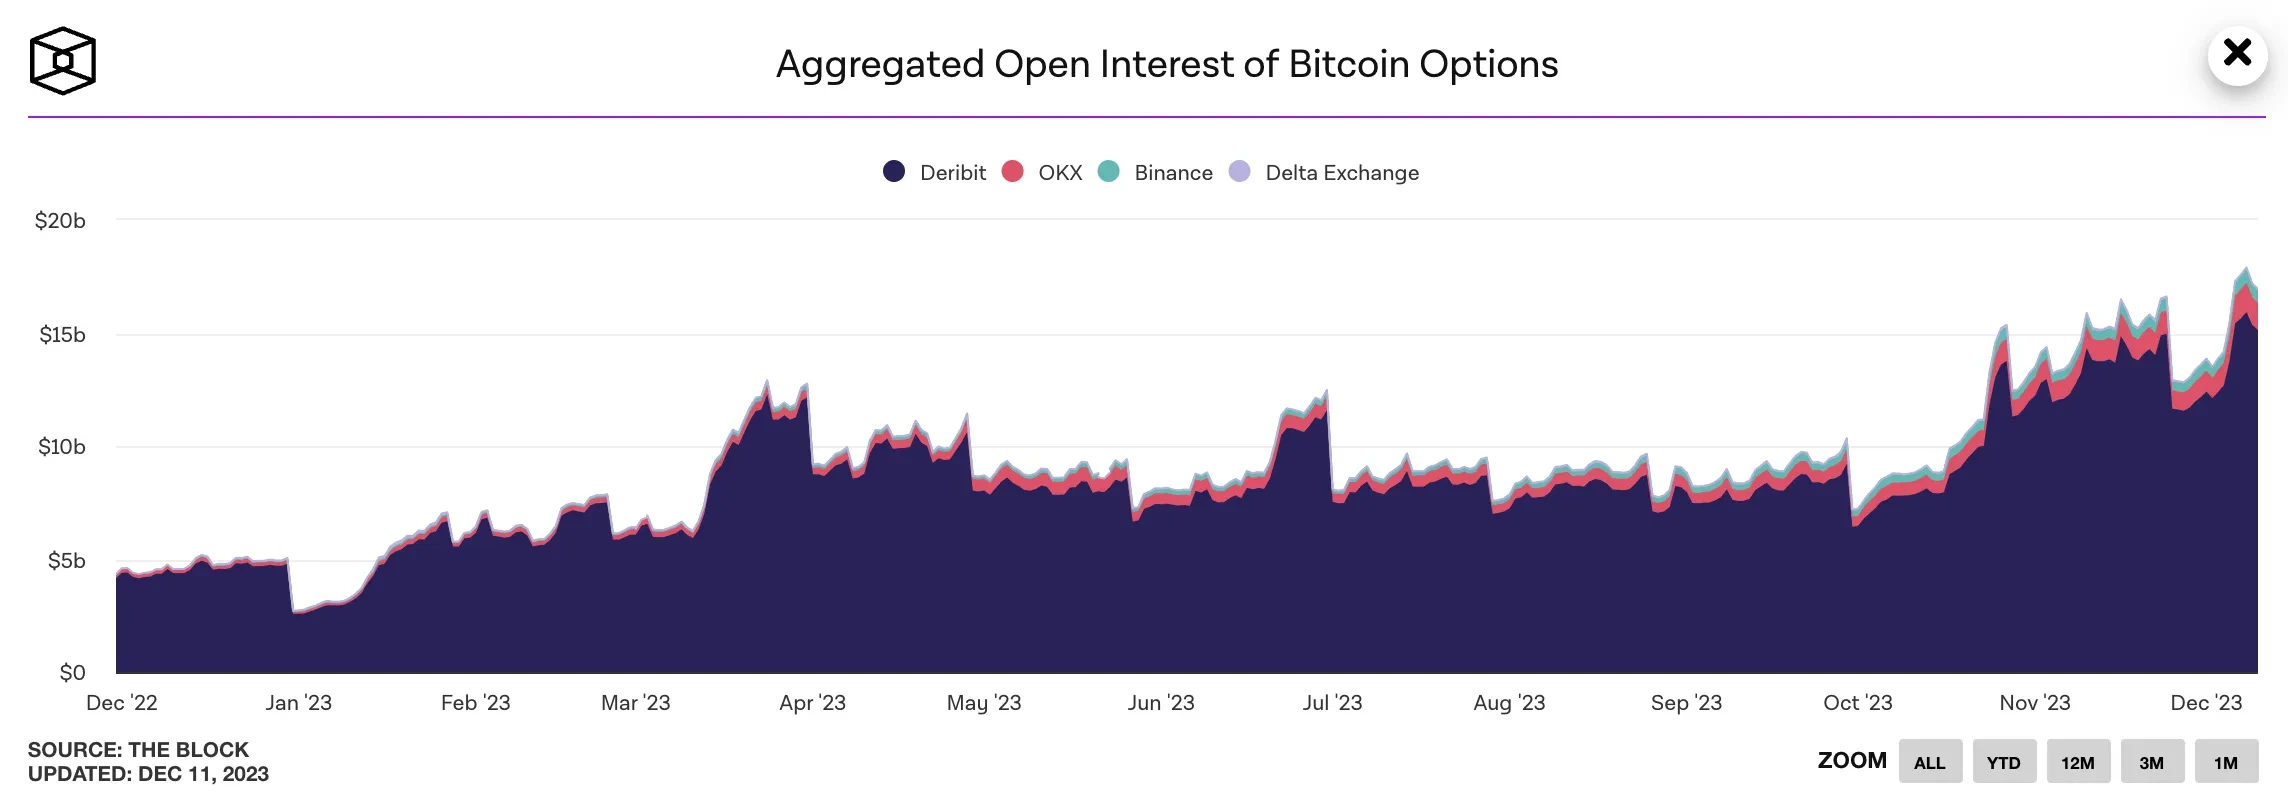 Ether options open interest on CME on track to hit fresh all-time high